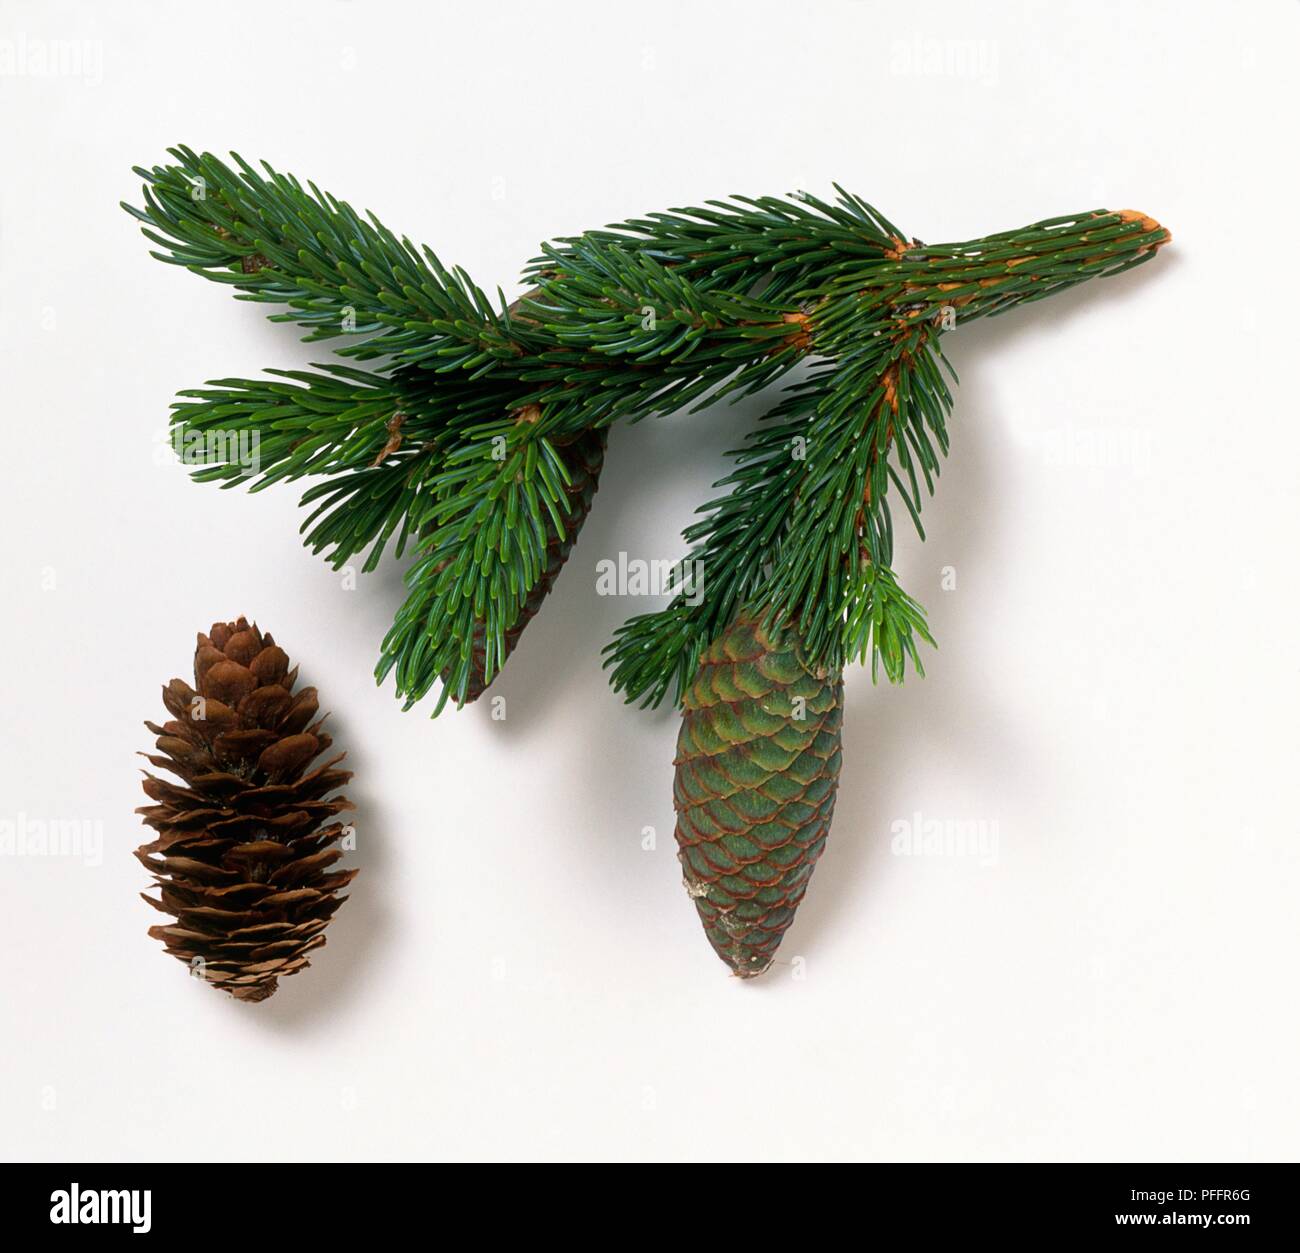 Picea jezoensis (Yezo spruce), twig covered in green leaves, and cones Stock Photo